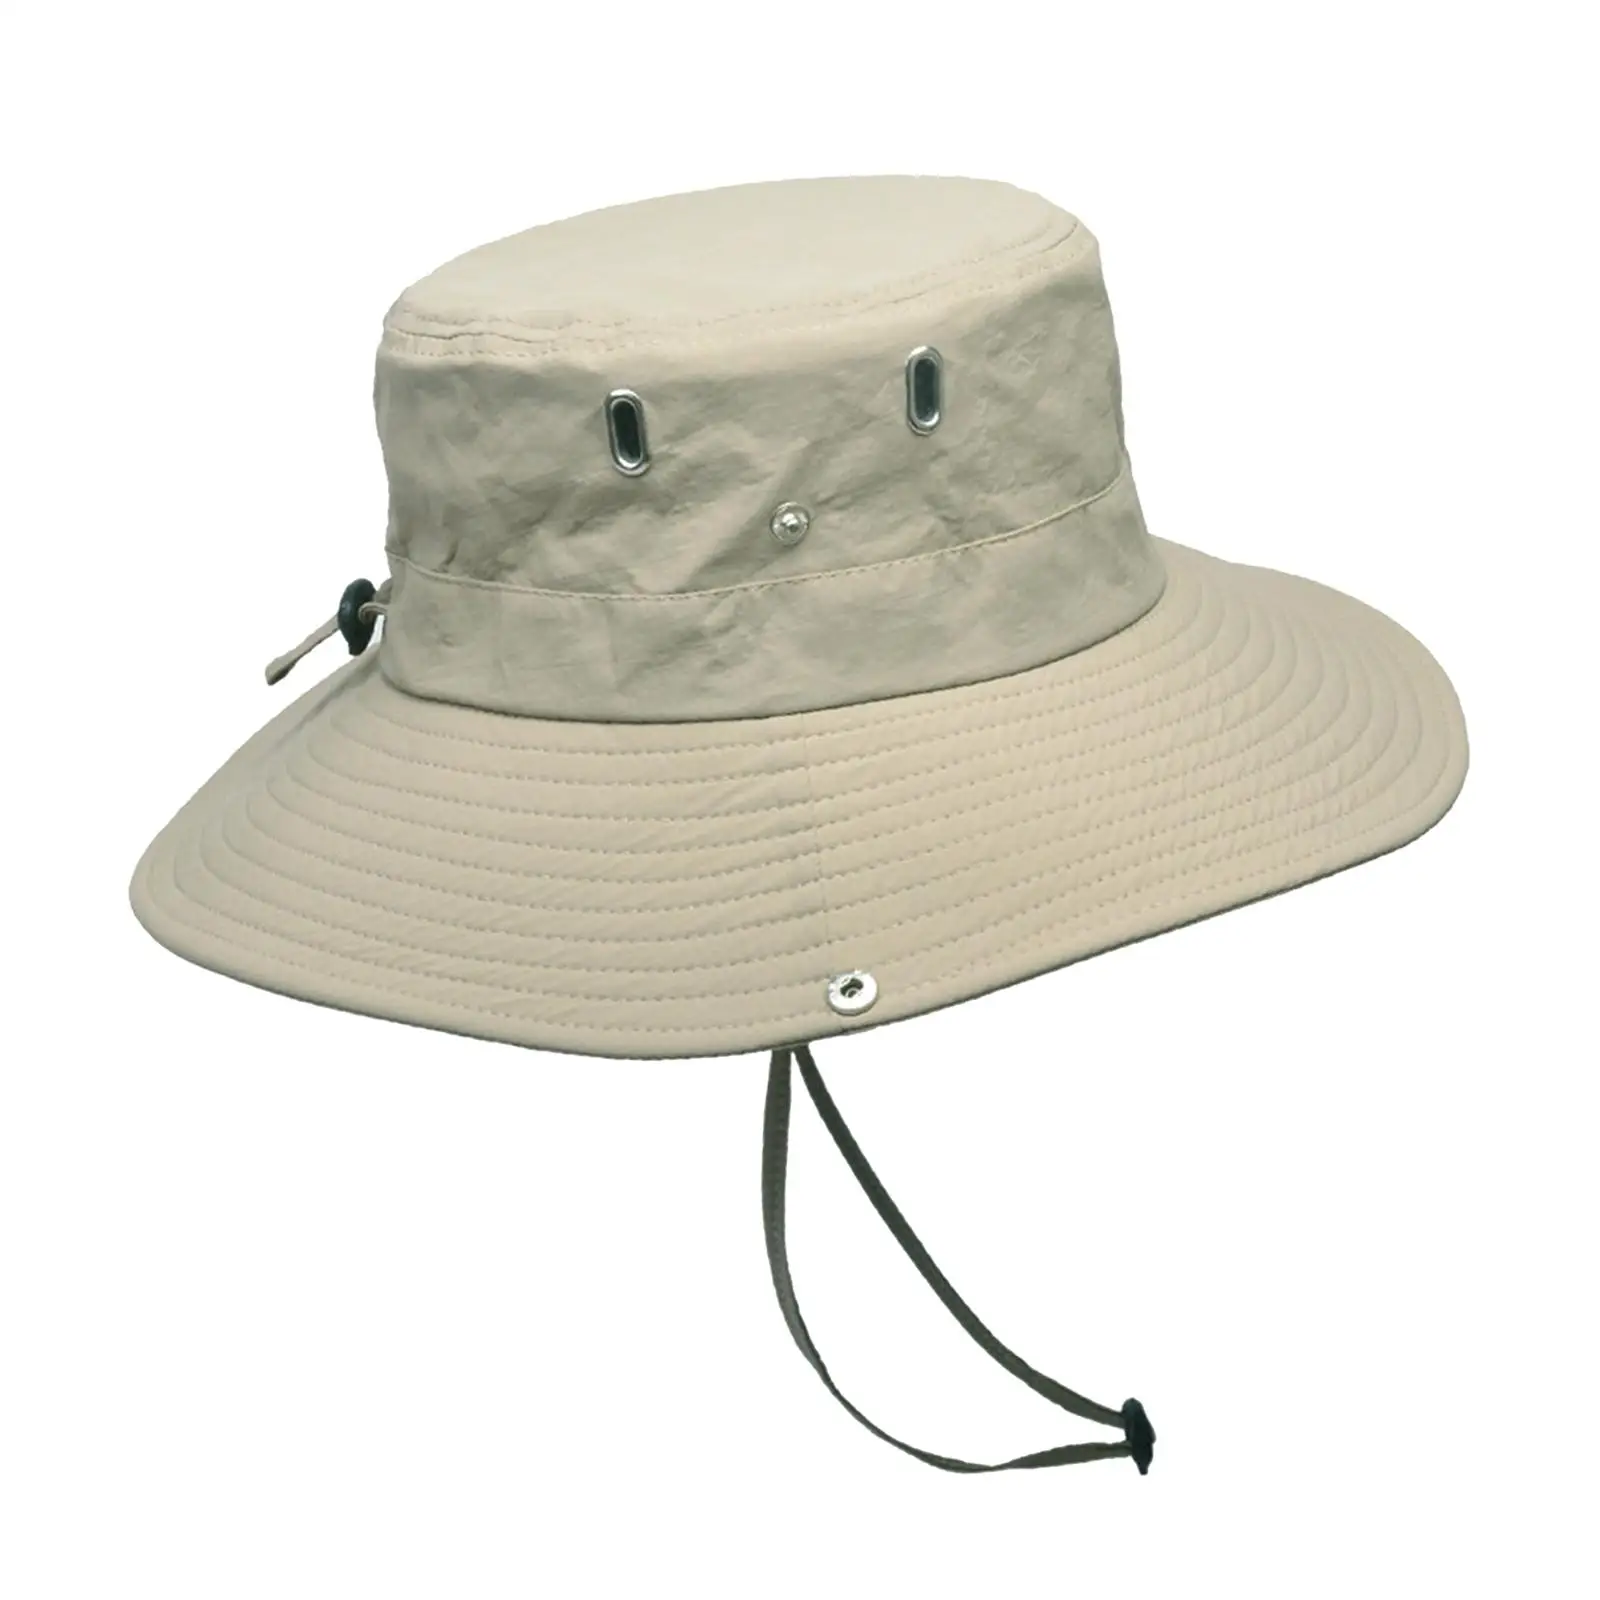 Bucket Hat Breathable Adjustable Sun Protection Sun Hats Summer Camping Caps for Fancy Dress Beach summer Sports Travel